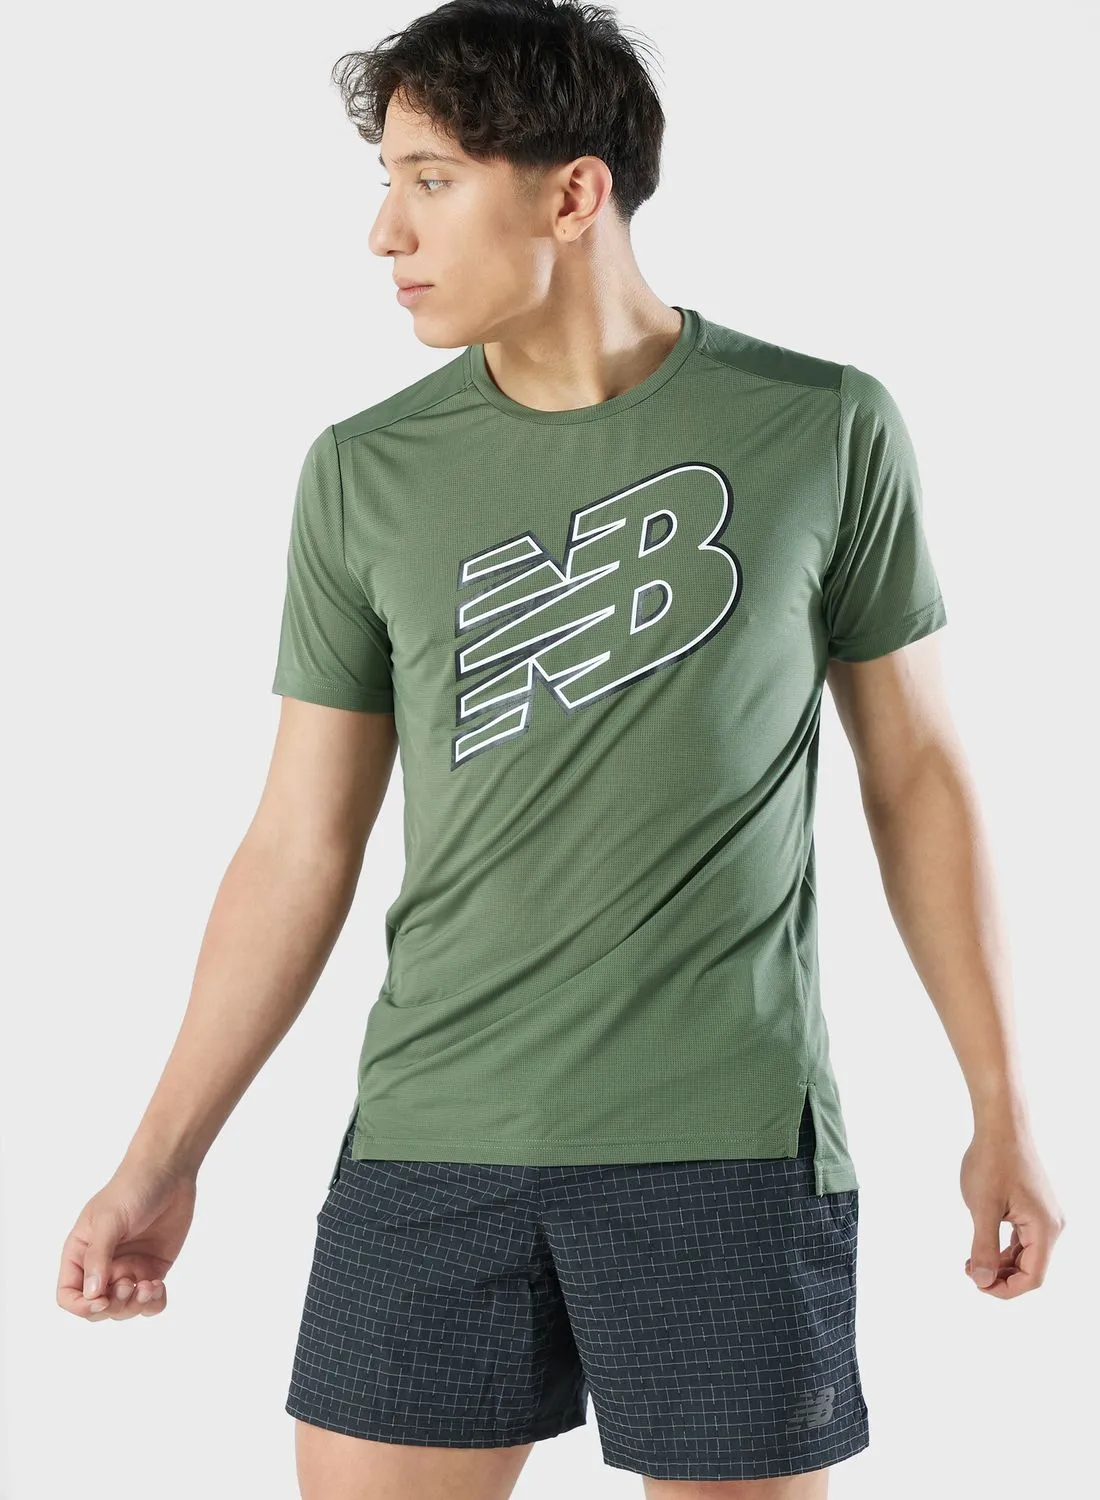 New Balance Accelerate Graphic T-Shirt